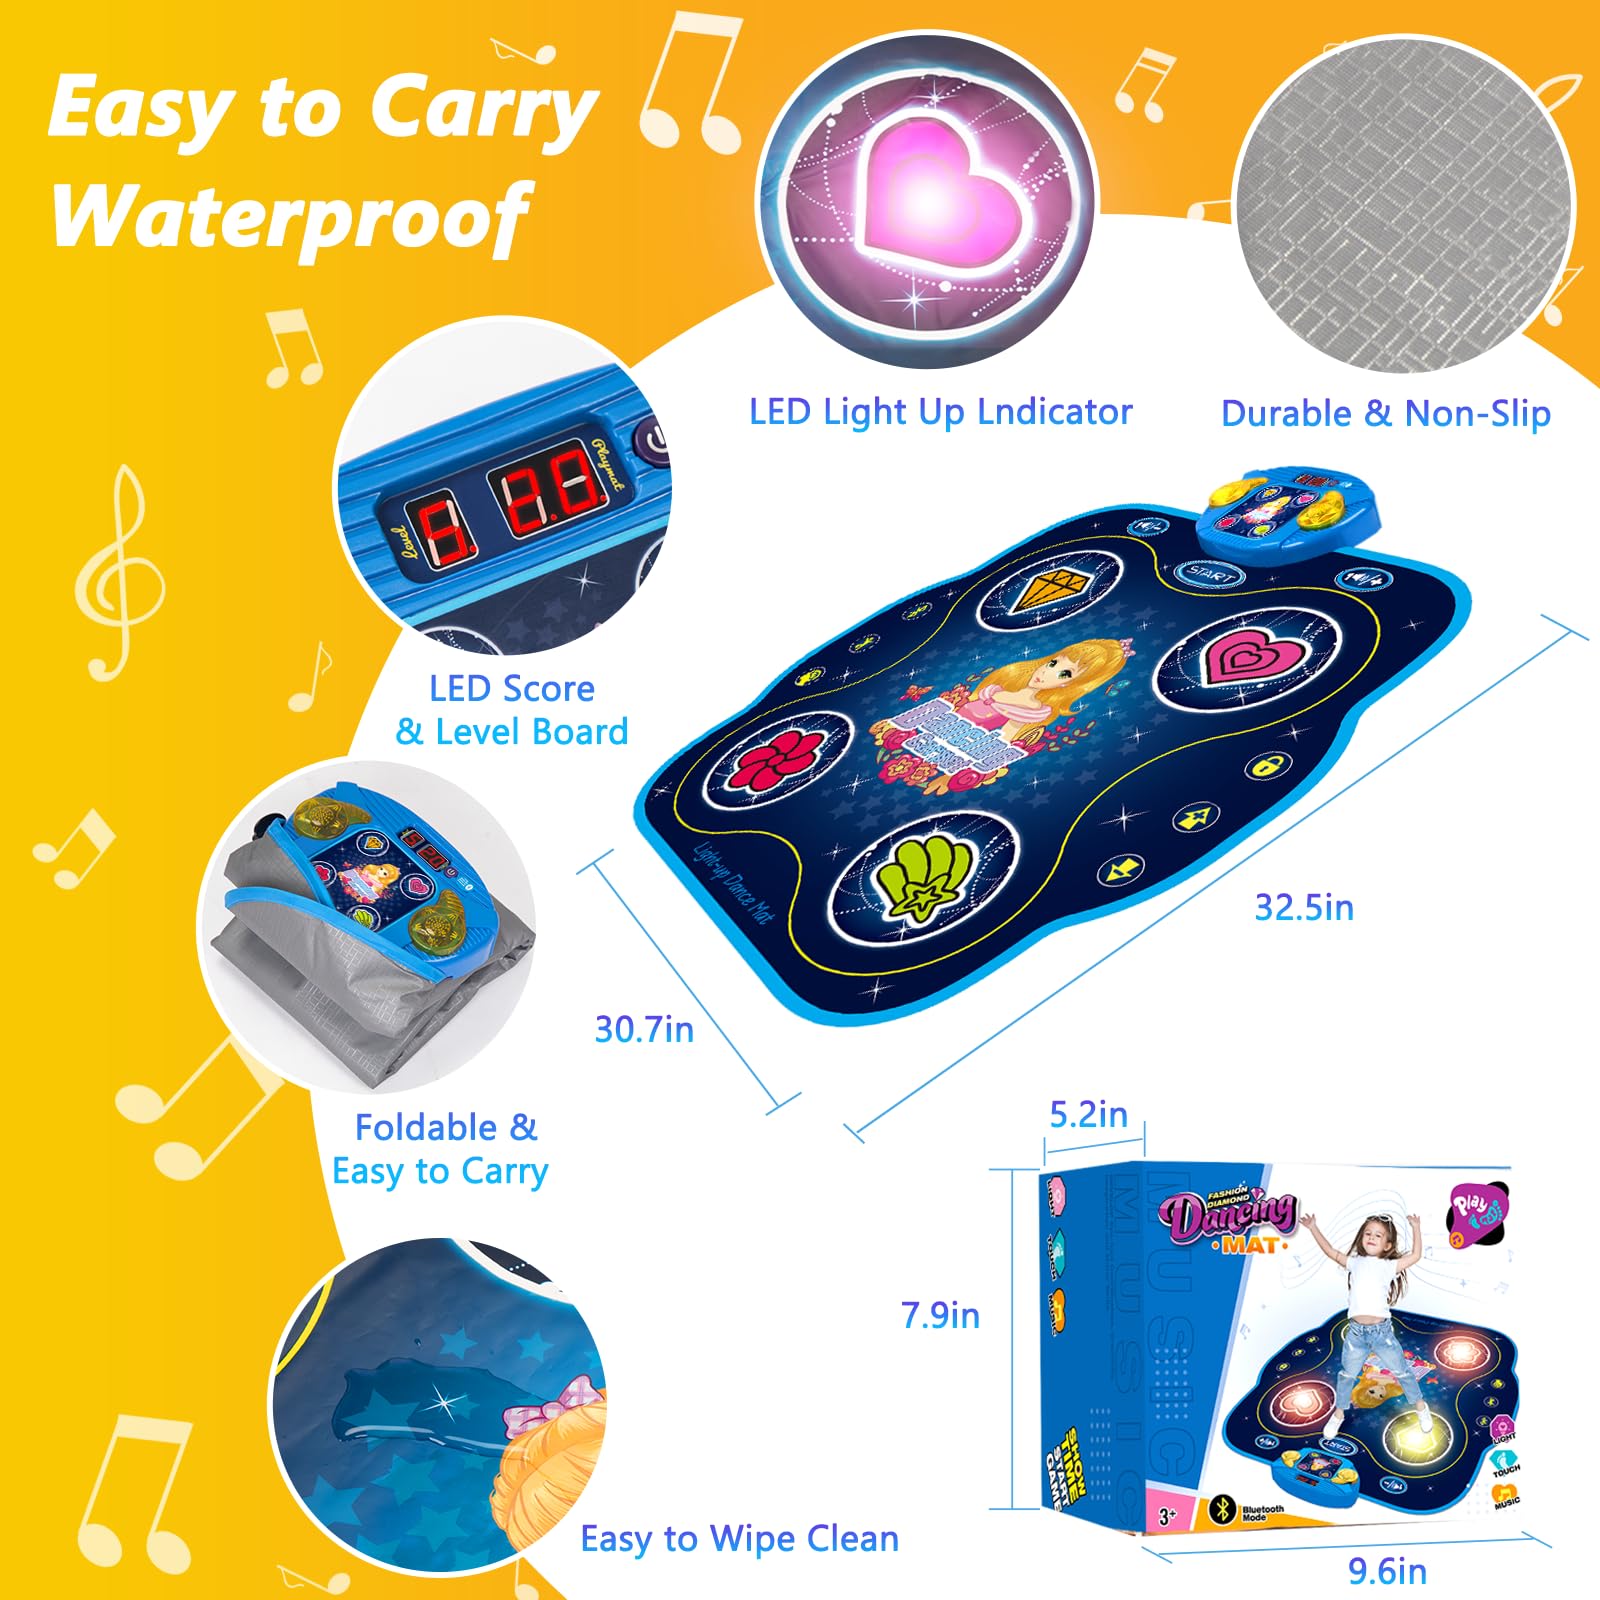 Dance Mat Toys Gift for 3-12 Year Old Kids Girls, Electronic Light Up Dance Pad Mats with Bluetooth 9 Levels Game, Christmas Birthday Gifts Dancing Mat for Kids Girls Boys Ages 3 4 5 6 7 8 9 10 11 12